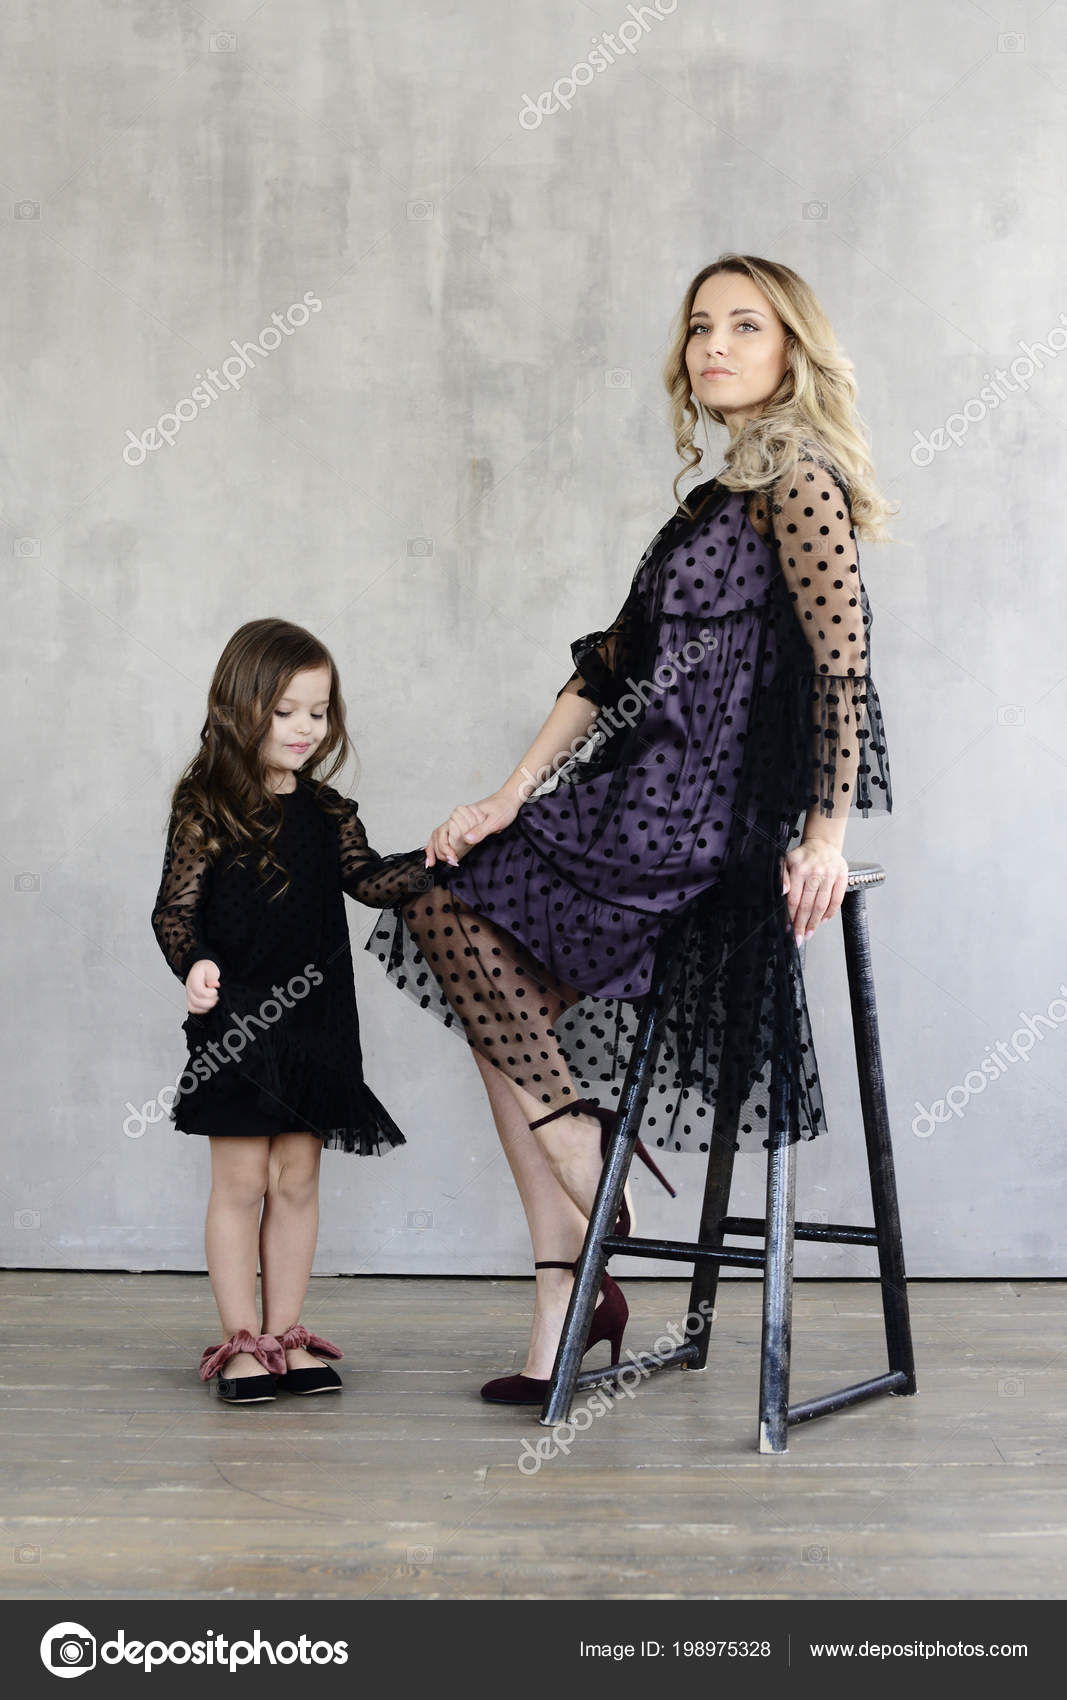 Mom and daughter Photoshoot Poses 2023 || Best Mother and Daughter  Photoshoot Ideas 2023 - YouTube